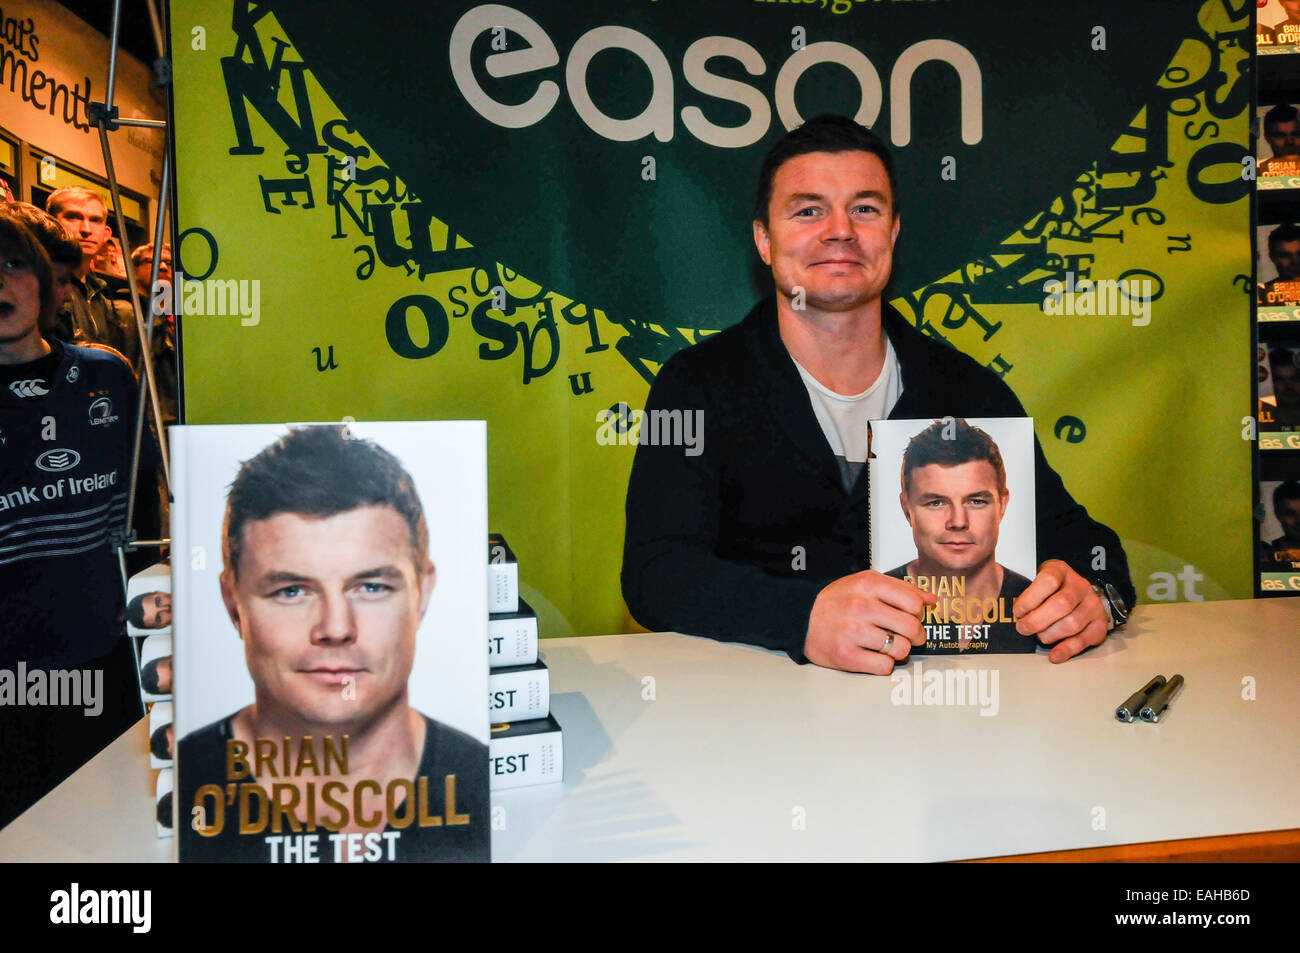 Belfast, Northern Ireland. 15 Nov 2014 - Former Irish Rugby captain Brian O'Driscoll signs copies of his autobiography 'The Test'.  O'Driscoll is the most capped player in Rugby Union's history, playing for Ireland 133 times, and 8 times for the British and Irish Lions. Credit:  Stephen Barnes/Alamy Live News Stock Photo